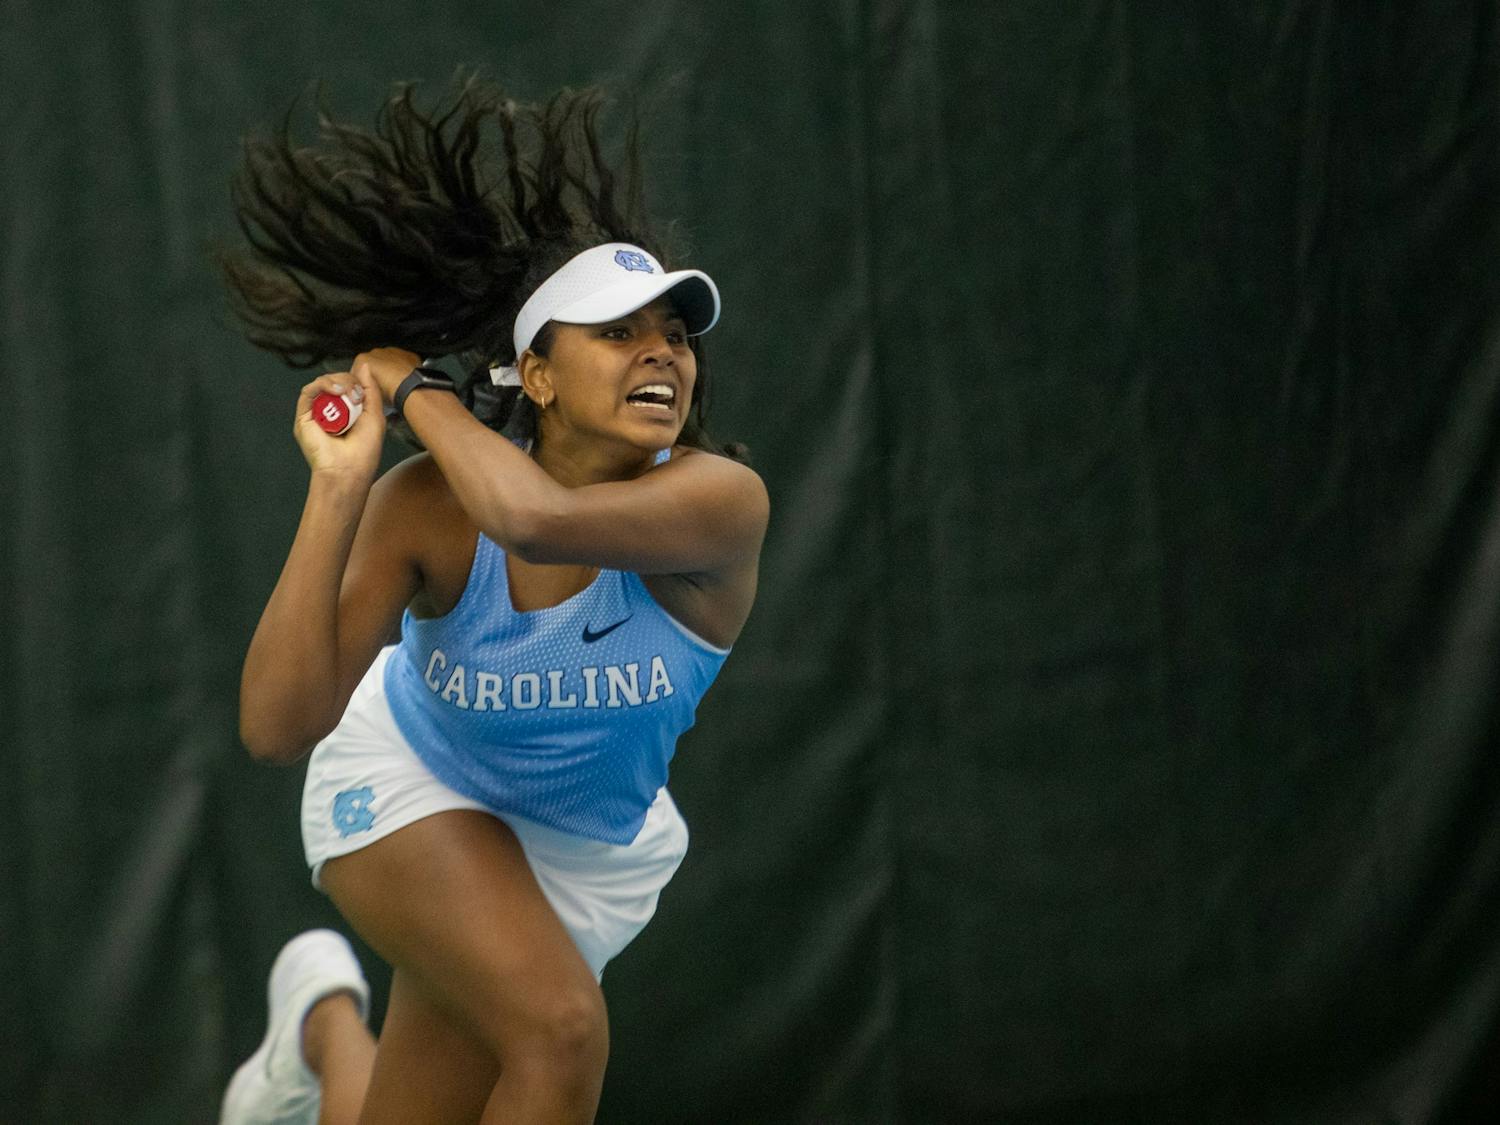 UNC first-year Anika Yarlagadda returns a volley during her singles match against the University of Michigan at the Cone-Kenfield Tennis Center in Chapel Hill, N.C., on Feb. 1, 2020. Yarlagadda went on to win her match giving the Tar Heels the last point needed to secure a 4-0 victory against Michigan.